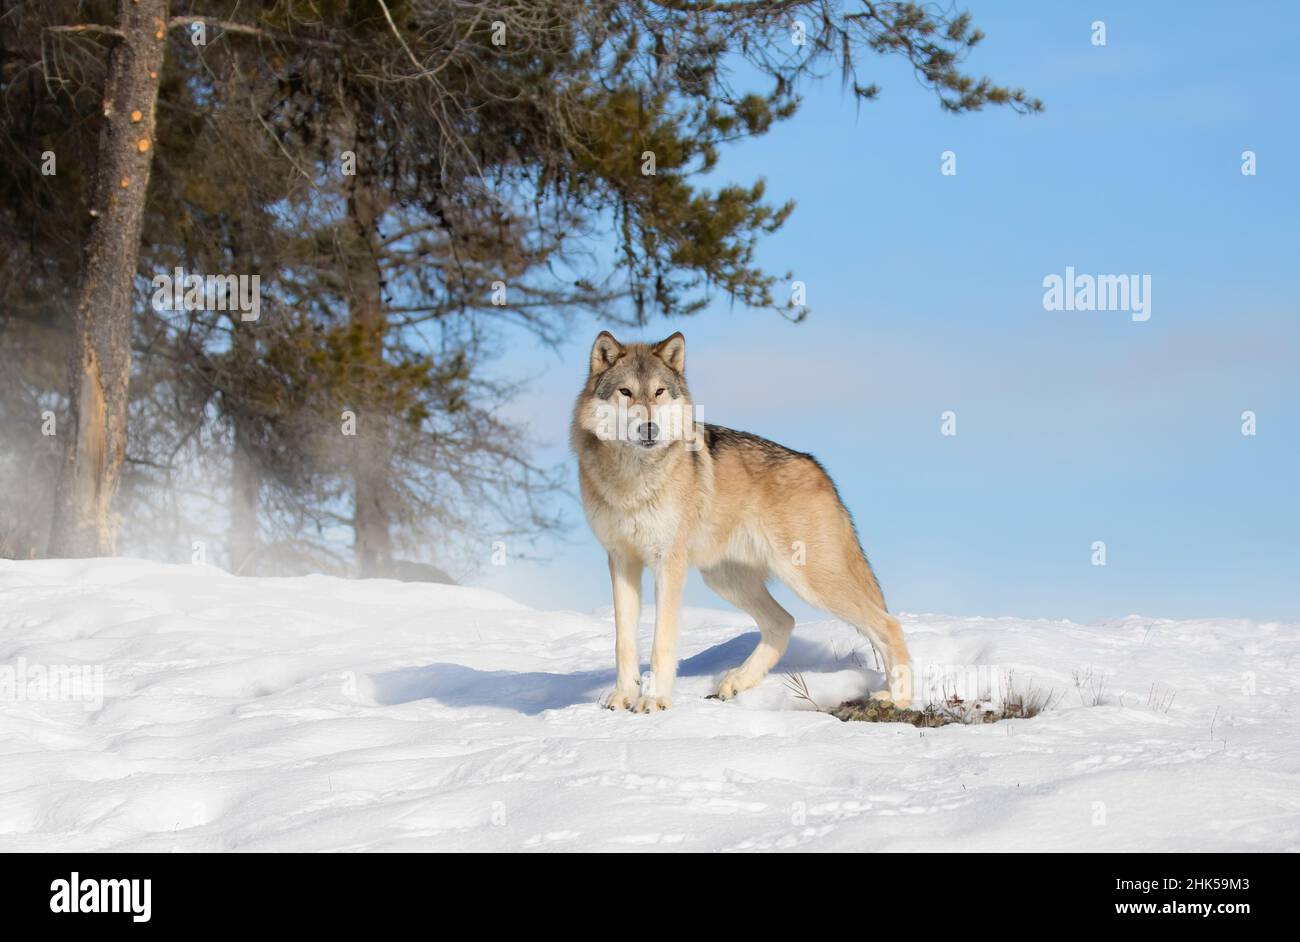 Tundra Wolf (Canis lupus albus) standing in the winter snow with the mountains in the background Stock Photo